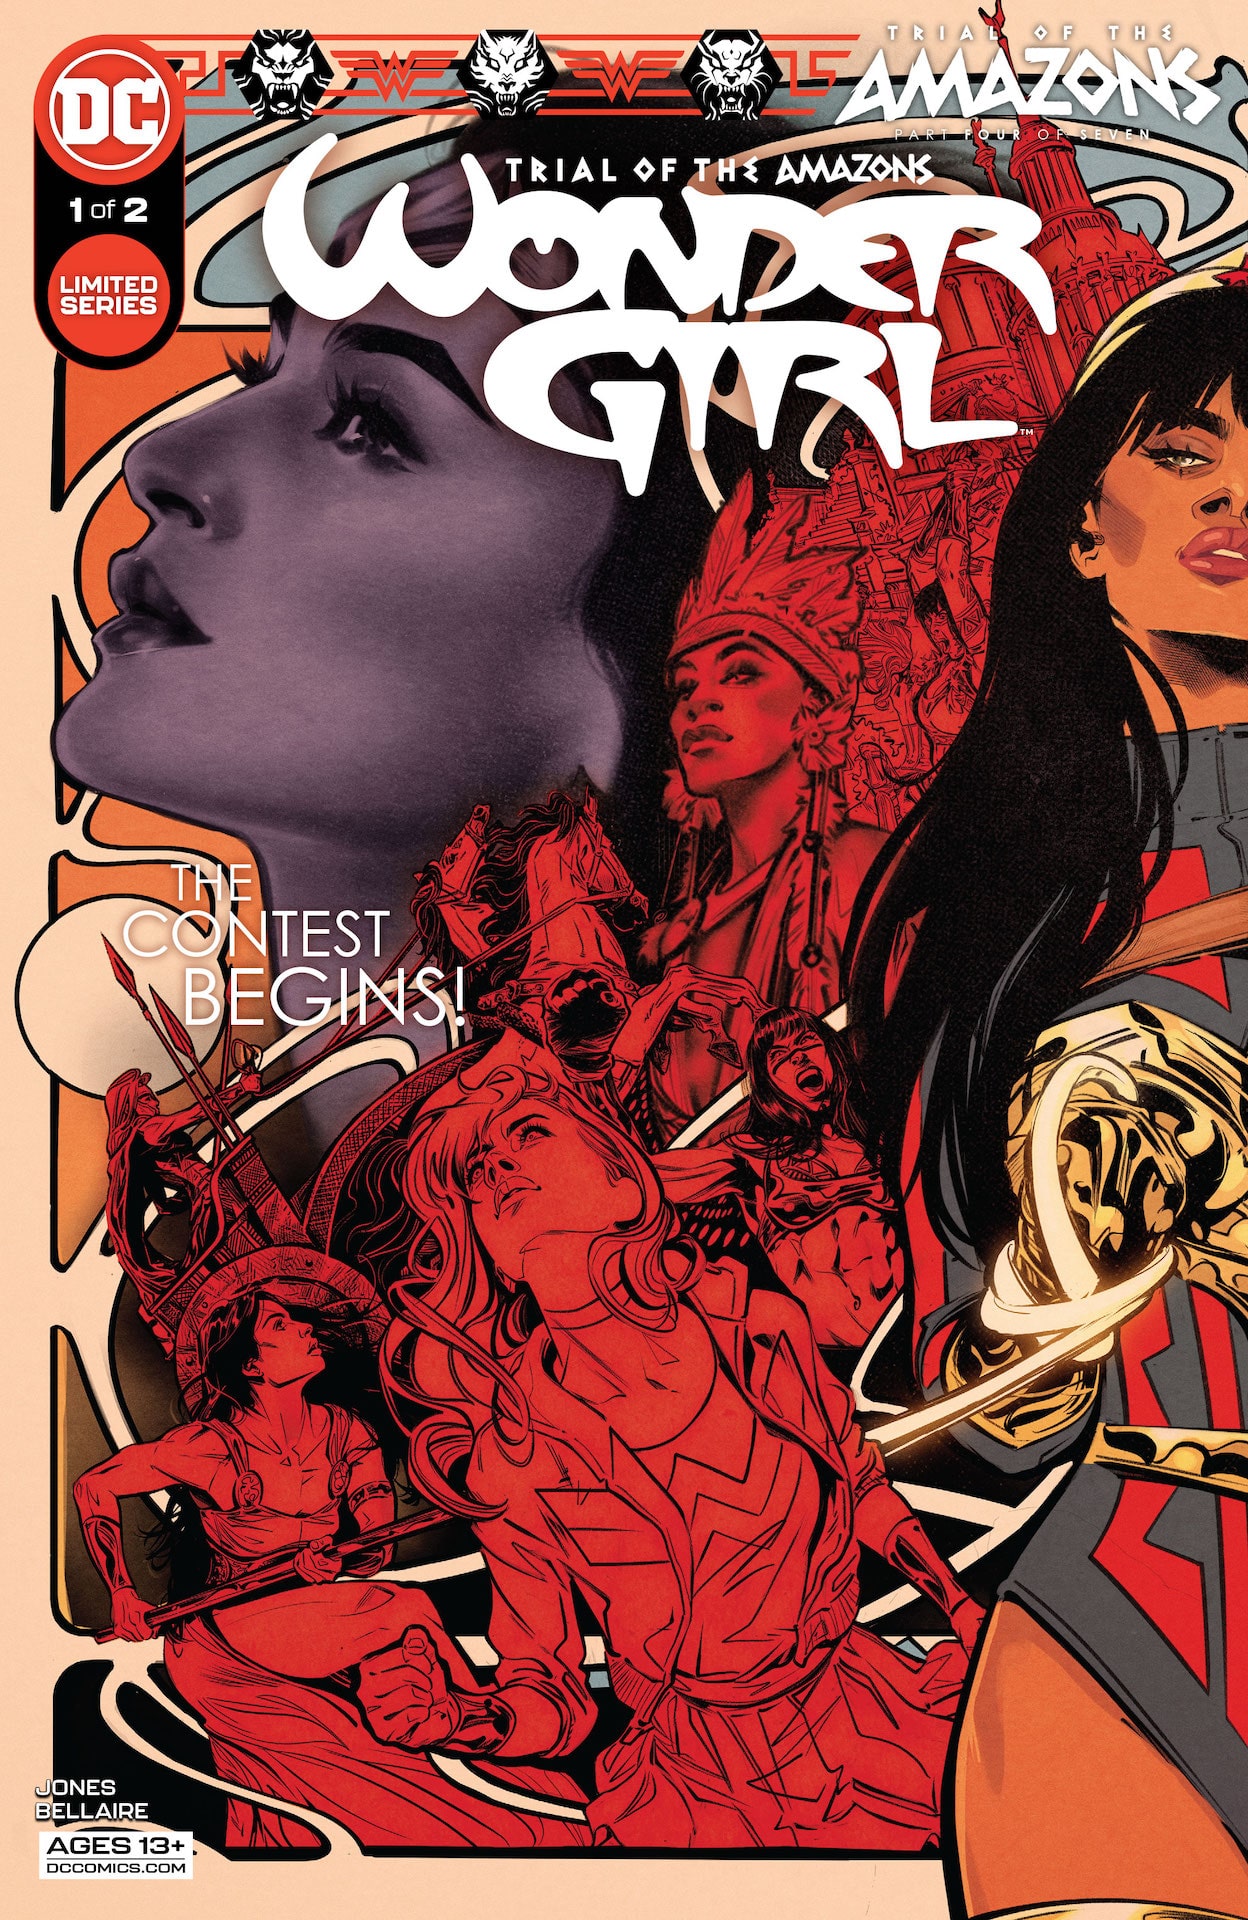 DC Preview: Trial of the Amazons: Wonder Girl #1